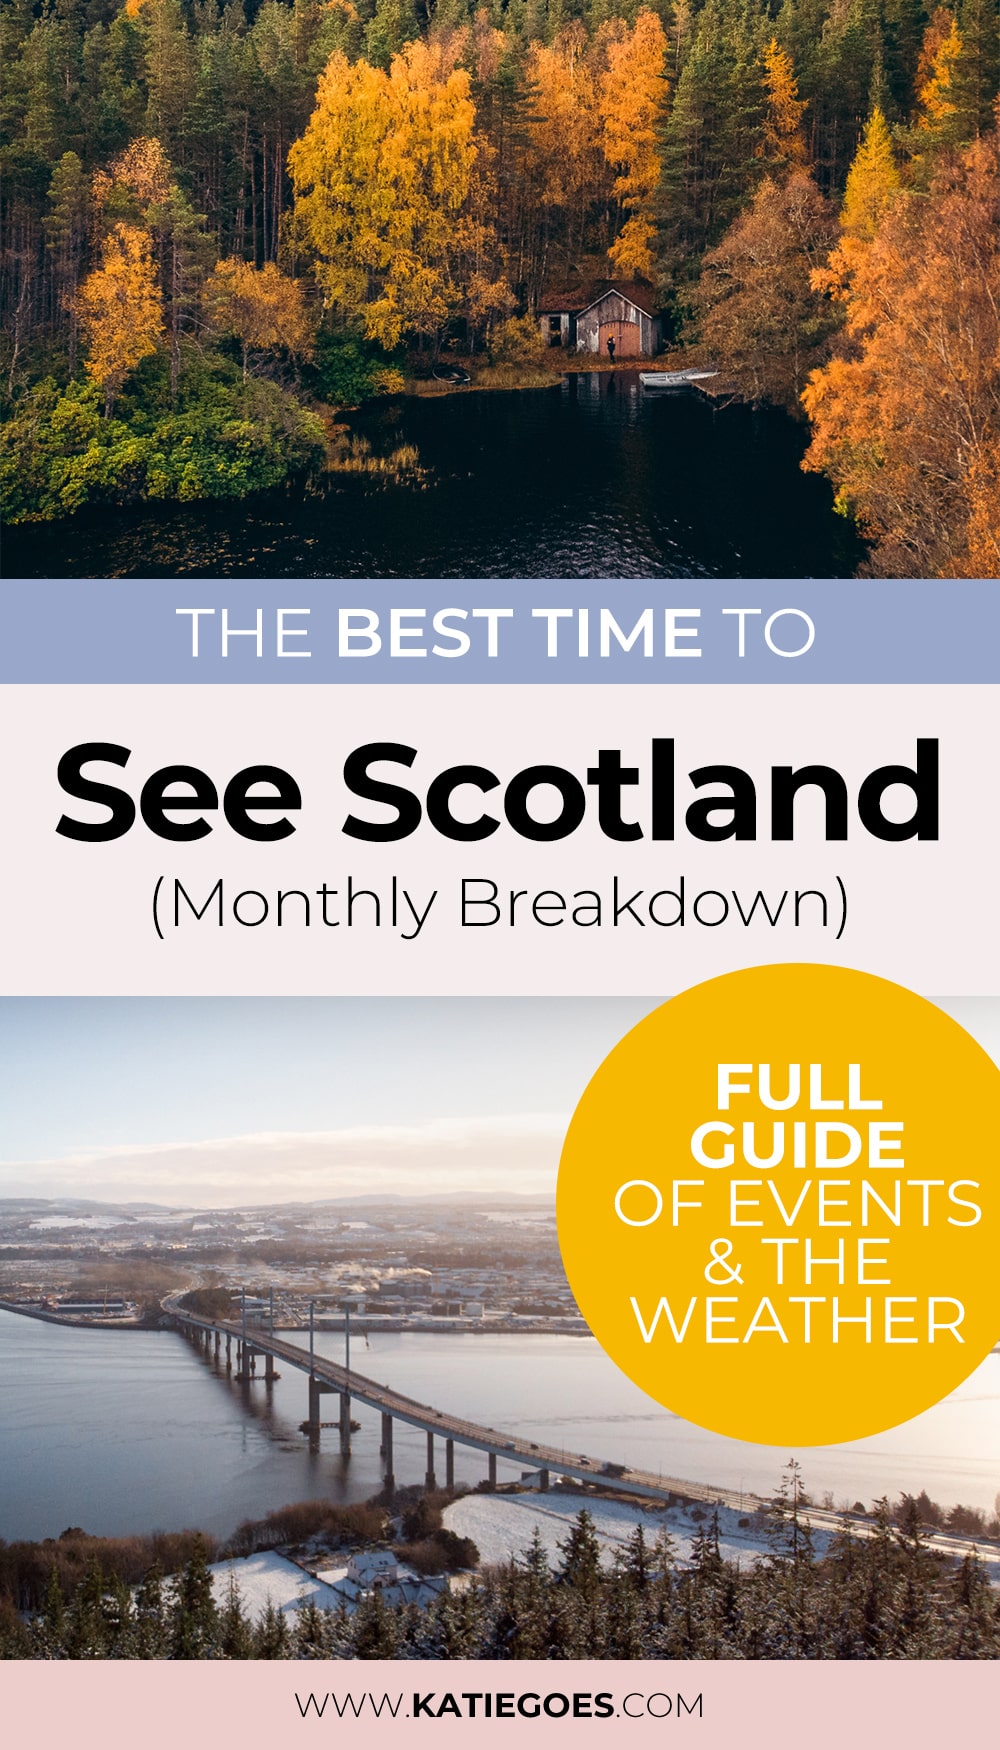 Pin Cover: What is the Best Month to Visit Scotland? Full Guide of the Events & the Weather